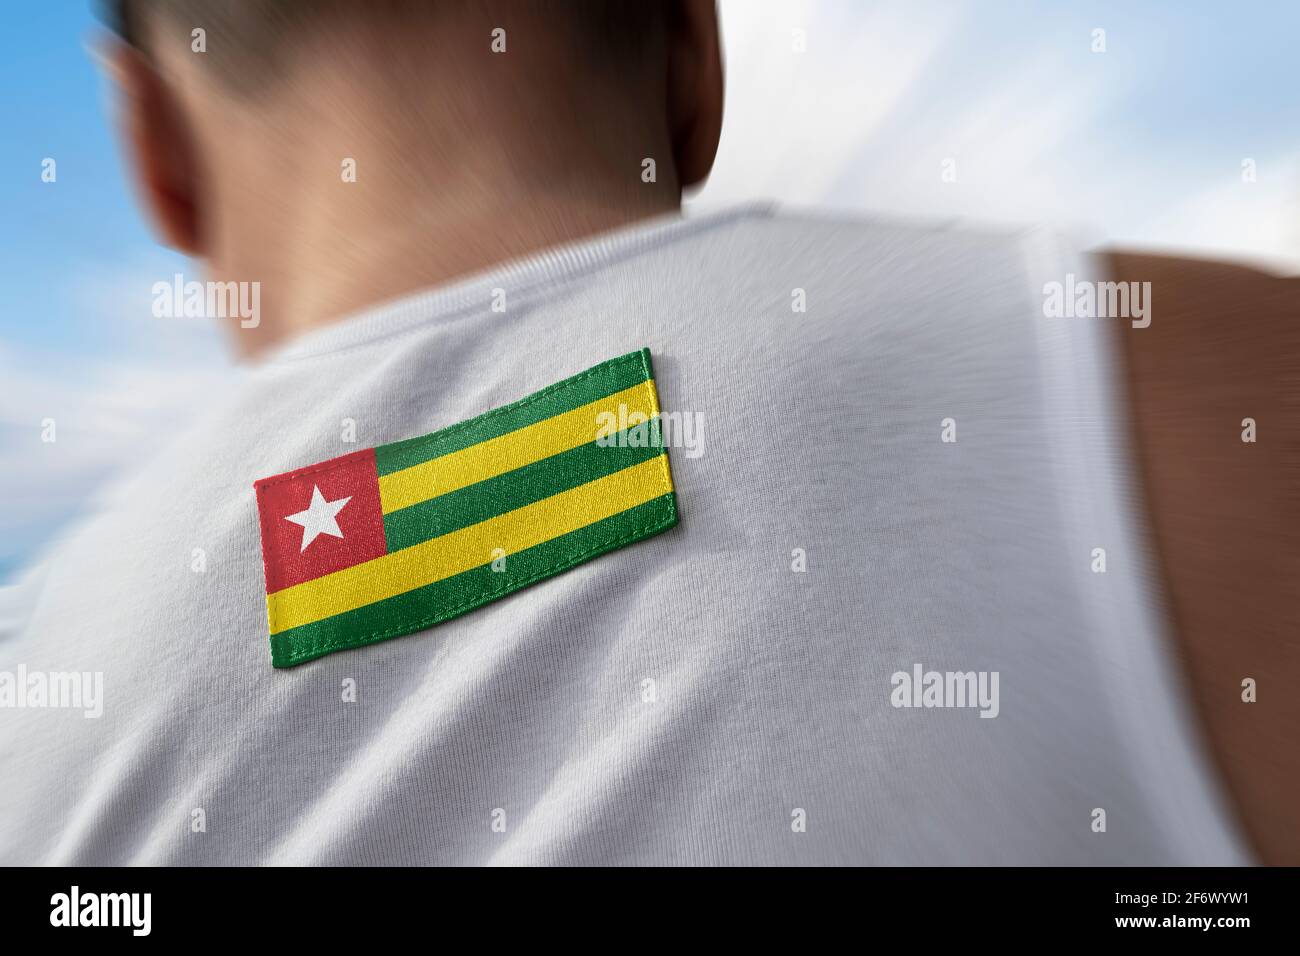 The national flag of Togo on the athlete's back Stock Photo